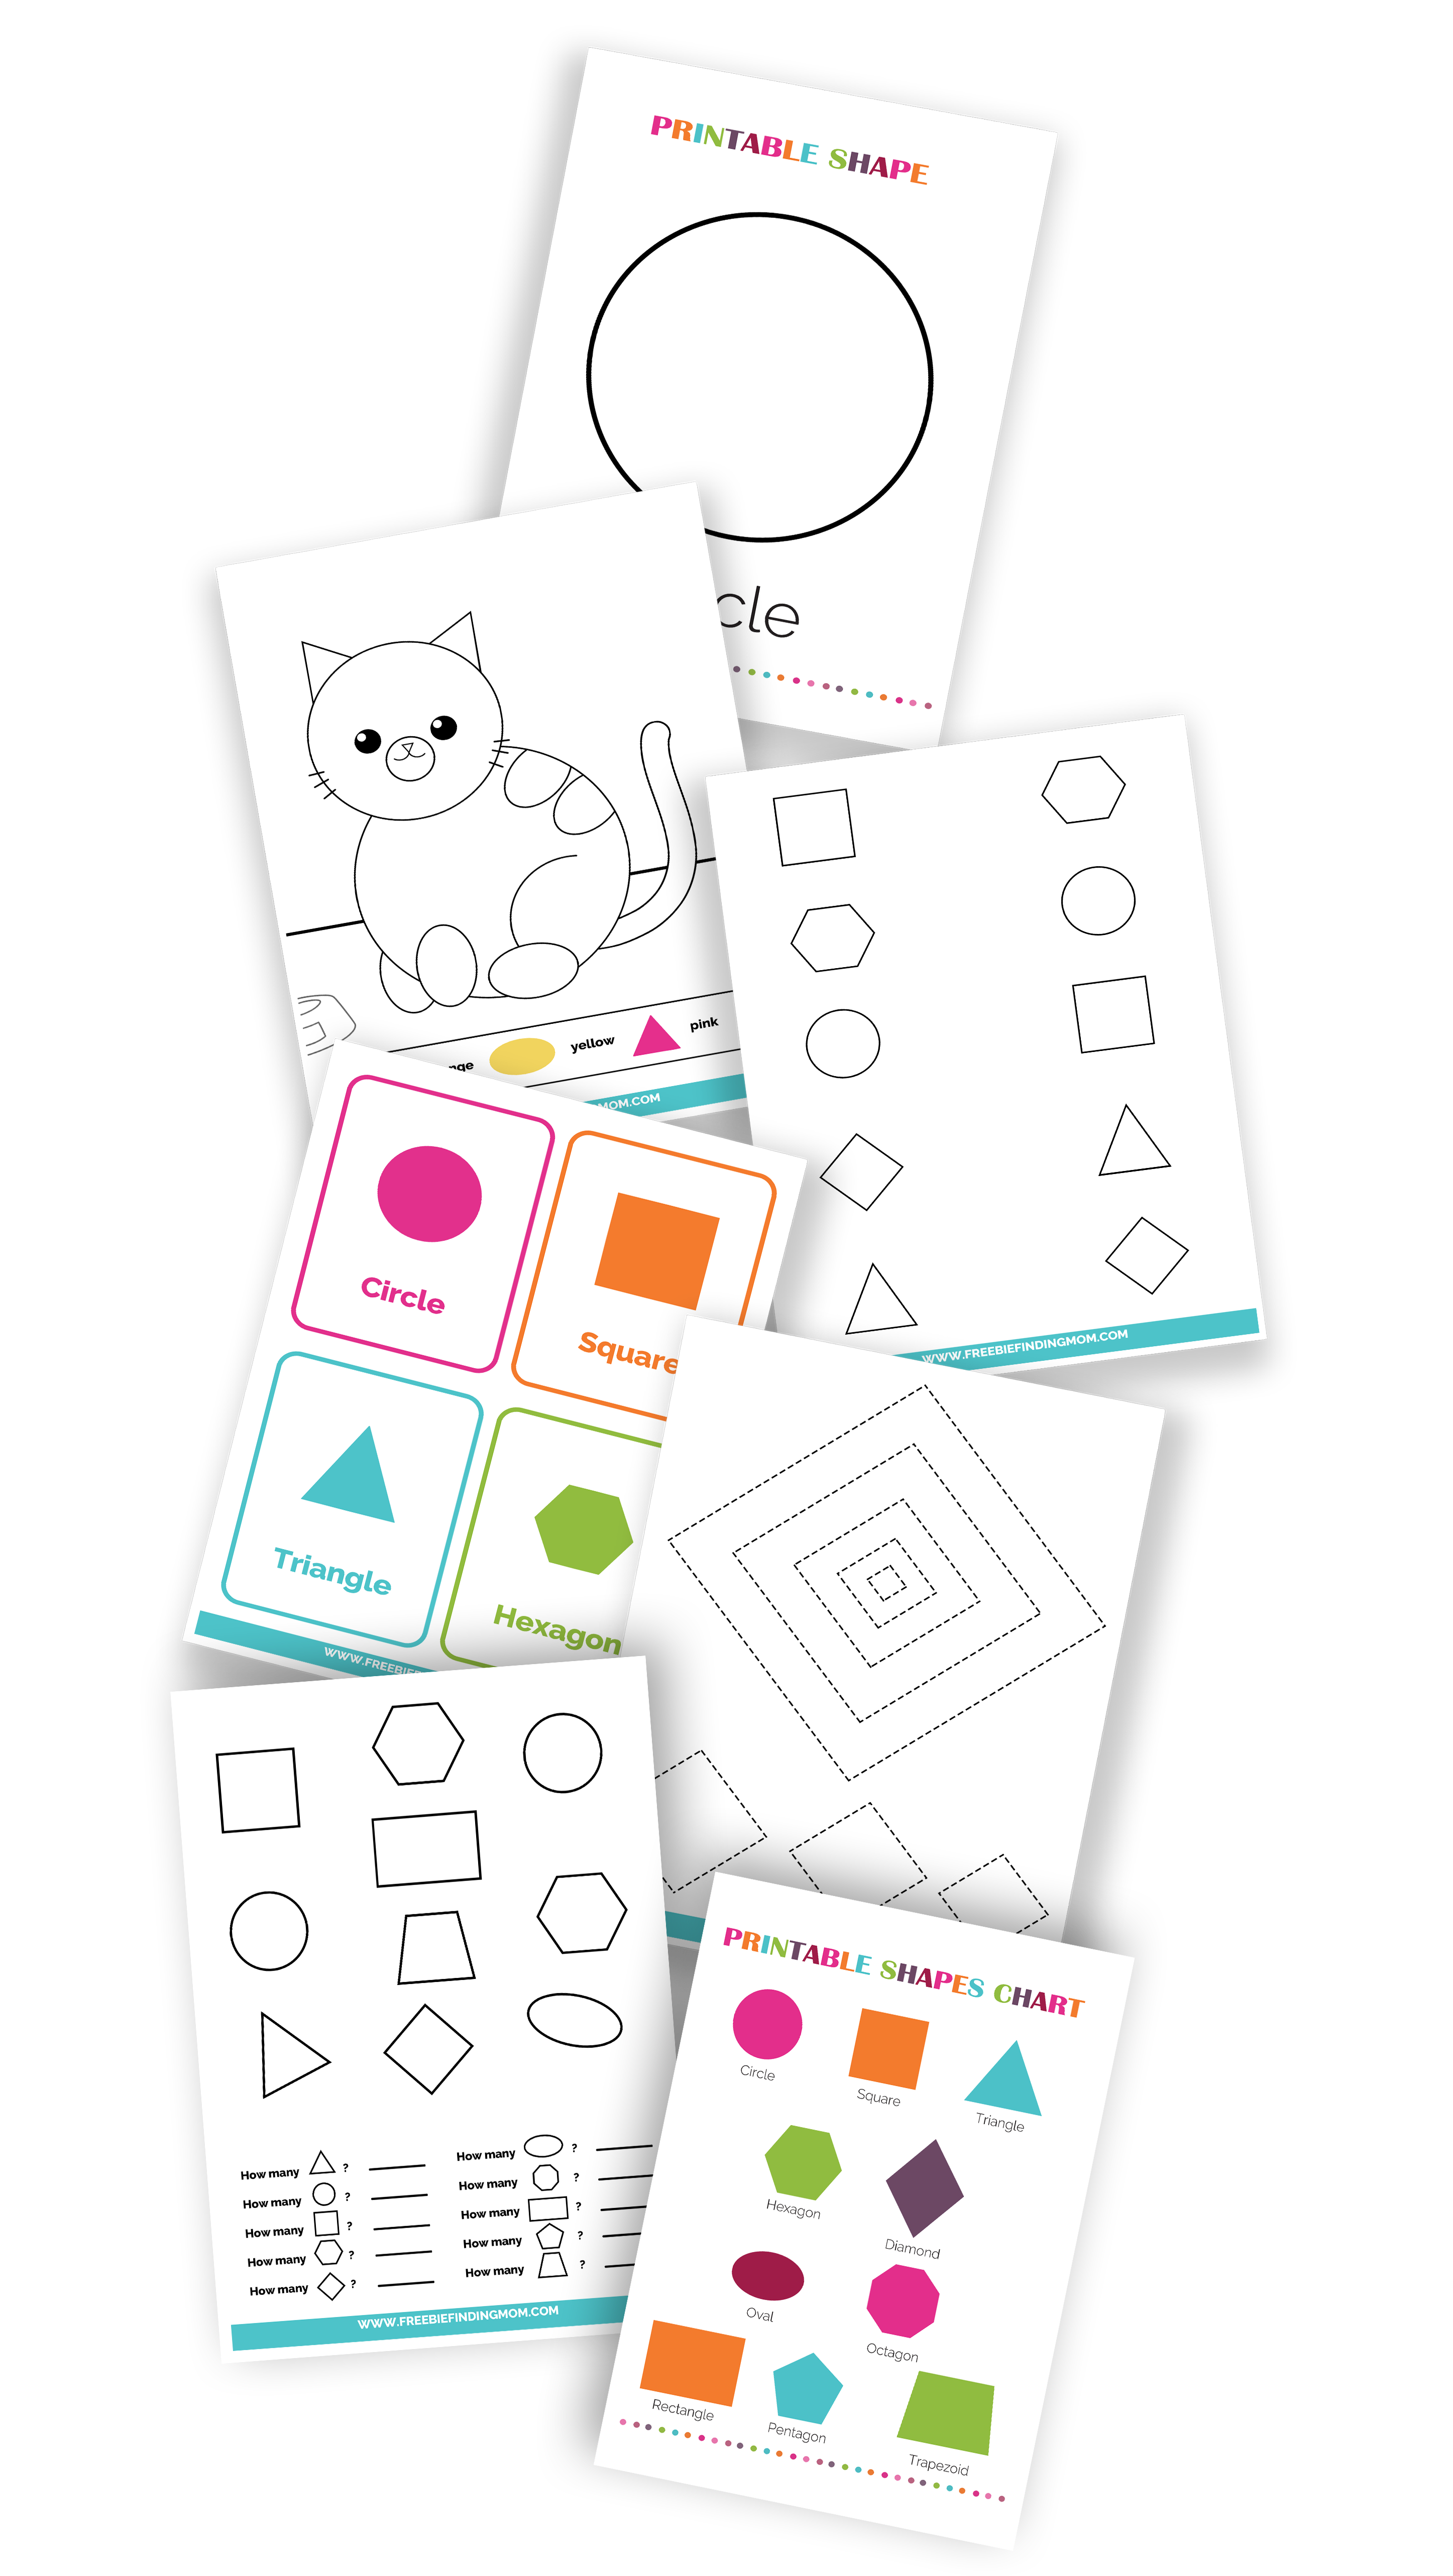 shapes-worksheets-132-pages-freebie-finding-mom-reviews-on-judge-me